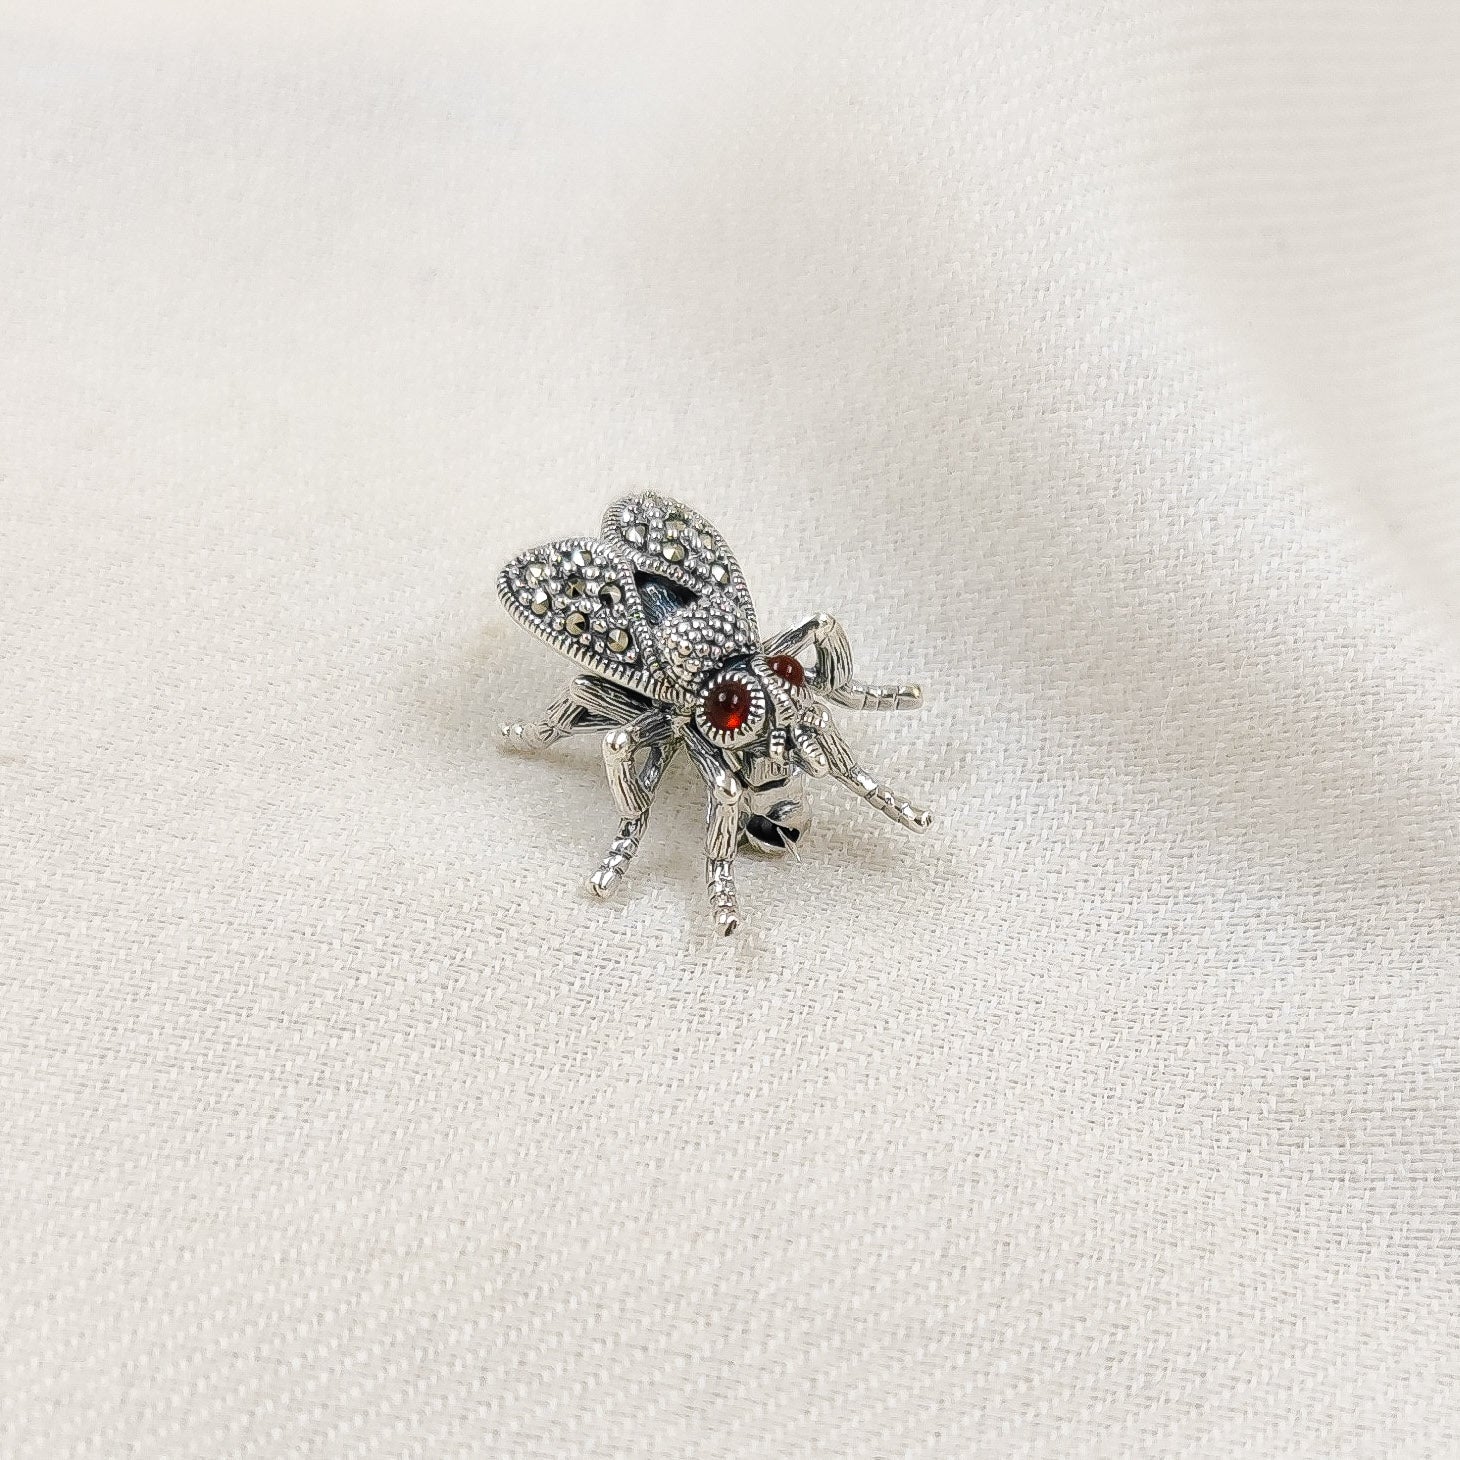 Silver Jewelry Brooches and Lapel Pins by Jauhri 92.5 Silver - Marcasite Fly Brooch And Pendant